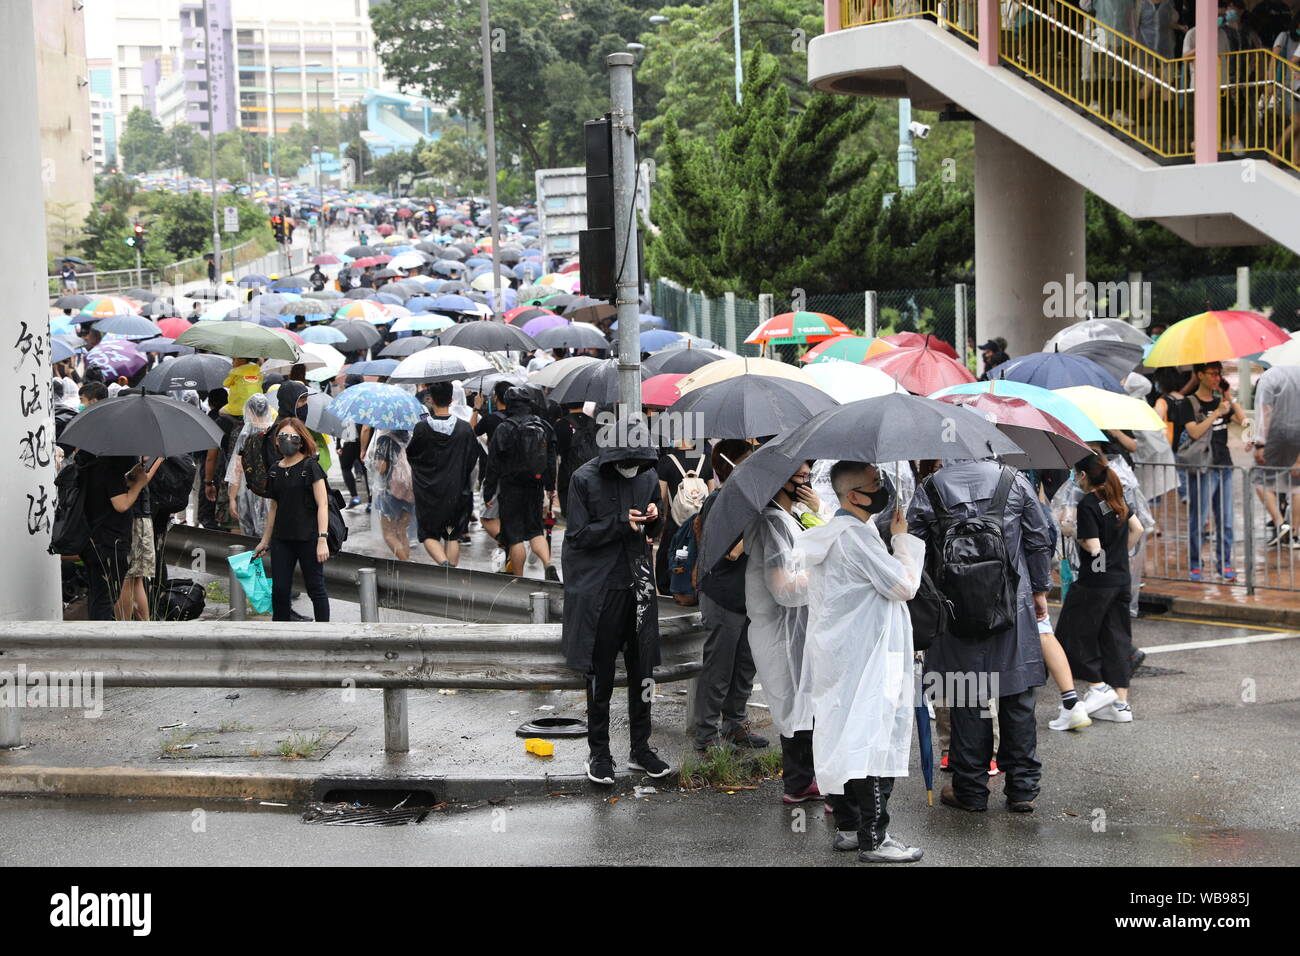 Hong Kong, China. 25th Aug, 2019. 25th August 2019. Hong Kong Anti Extradition Bill protest march in Tsuen Wan and Kwai Tsing. After a peaceful march major clashes took place, with protesters 5th throwing bricks, bottles and molotovs at police lines who were firing constant tear gas, rubber bullets and pepper balls. Police also fired live rounds at one point. Protesters dispersed once police mobilized 2 water cannon vehicles. Credit: David Coulson/Alamy Live News Stock Photo